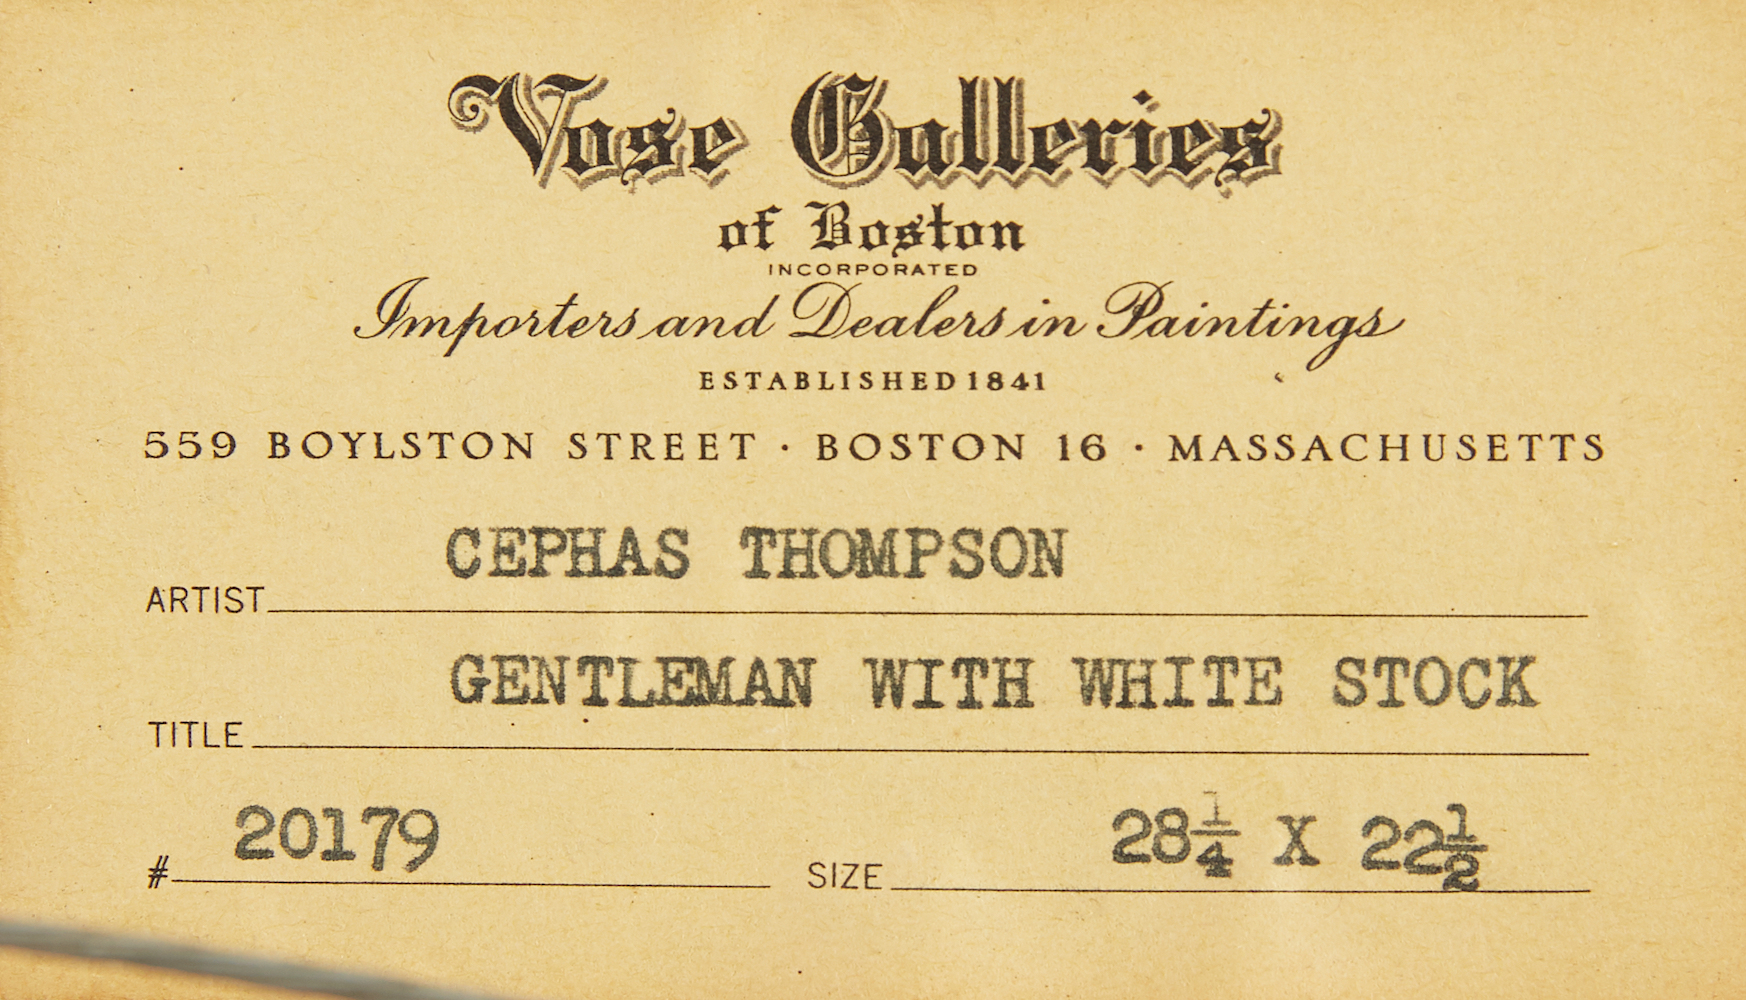 Cephas Thompson Gentleman with White Stock - Image 4 of 4